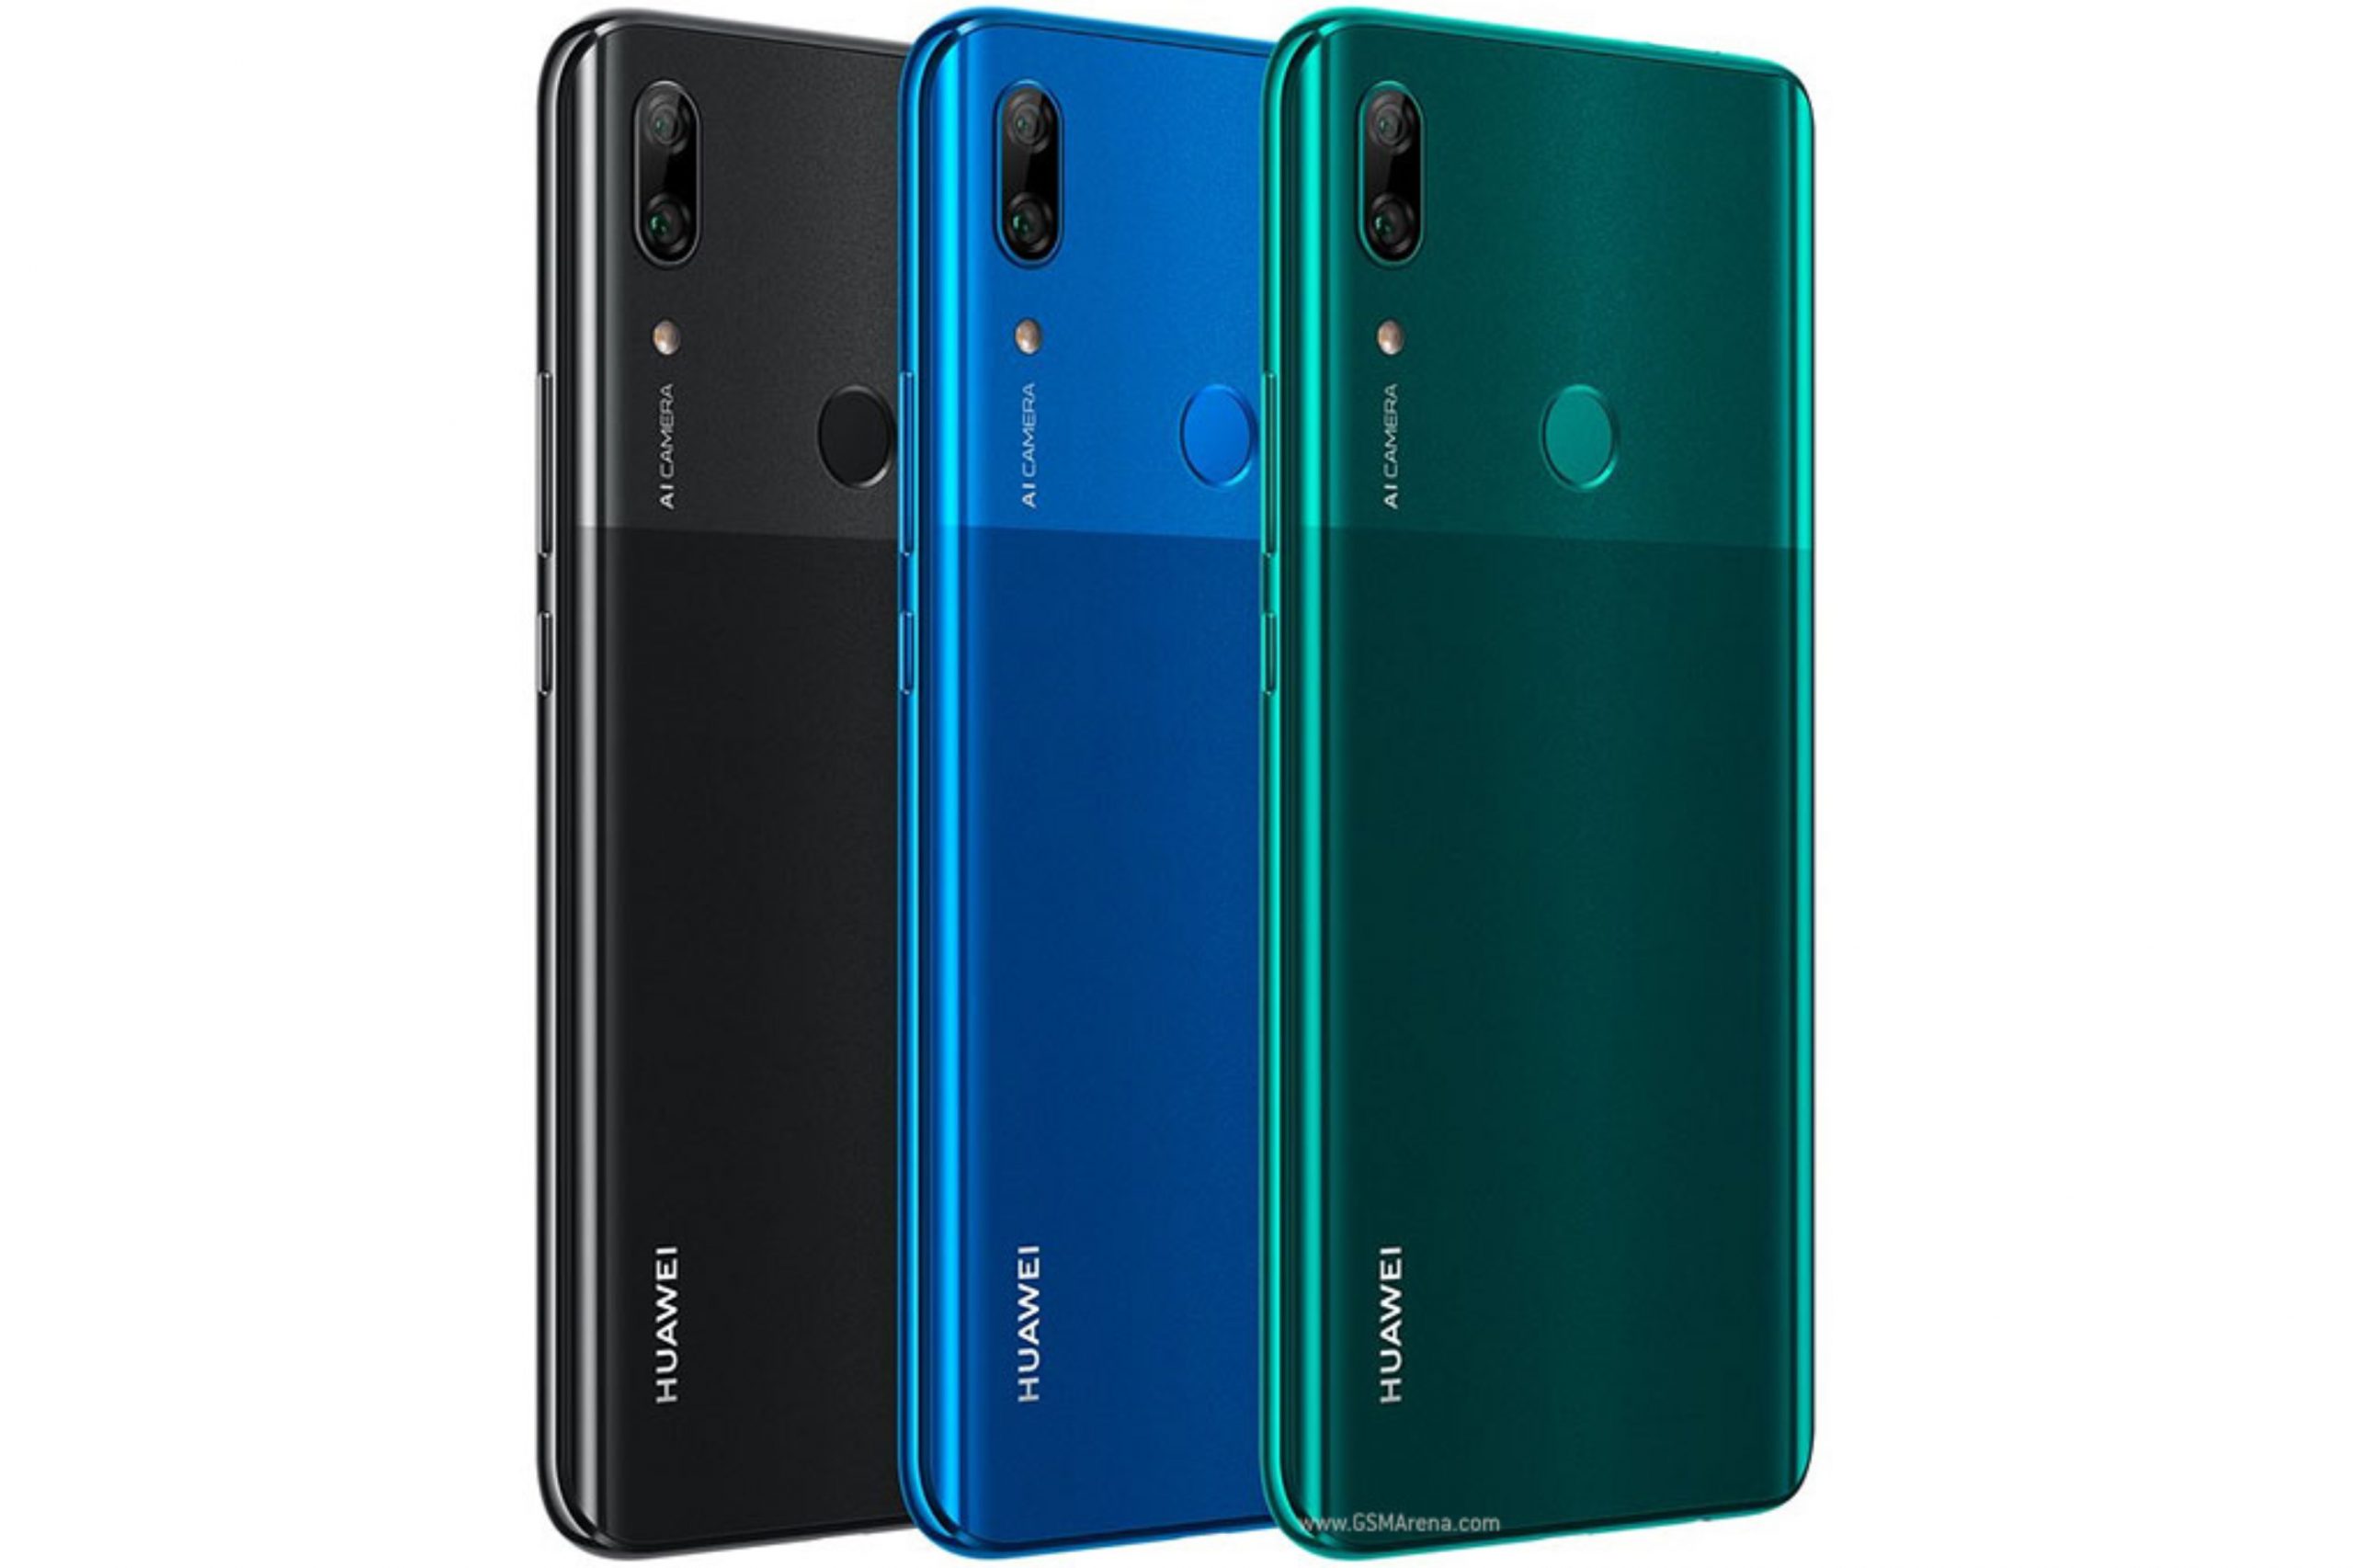 Huawei P Smart Z Price in Pakistan and Specs